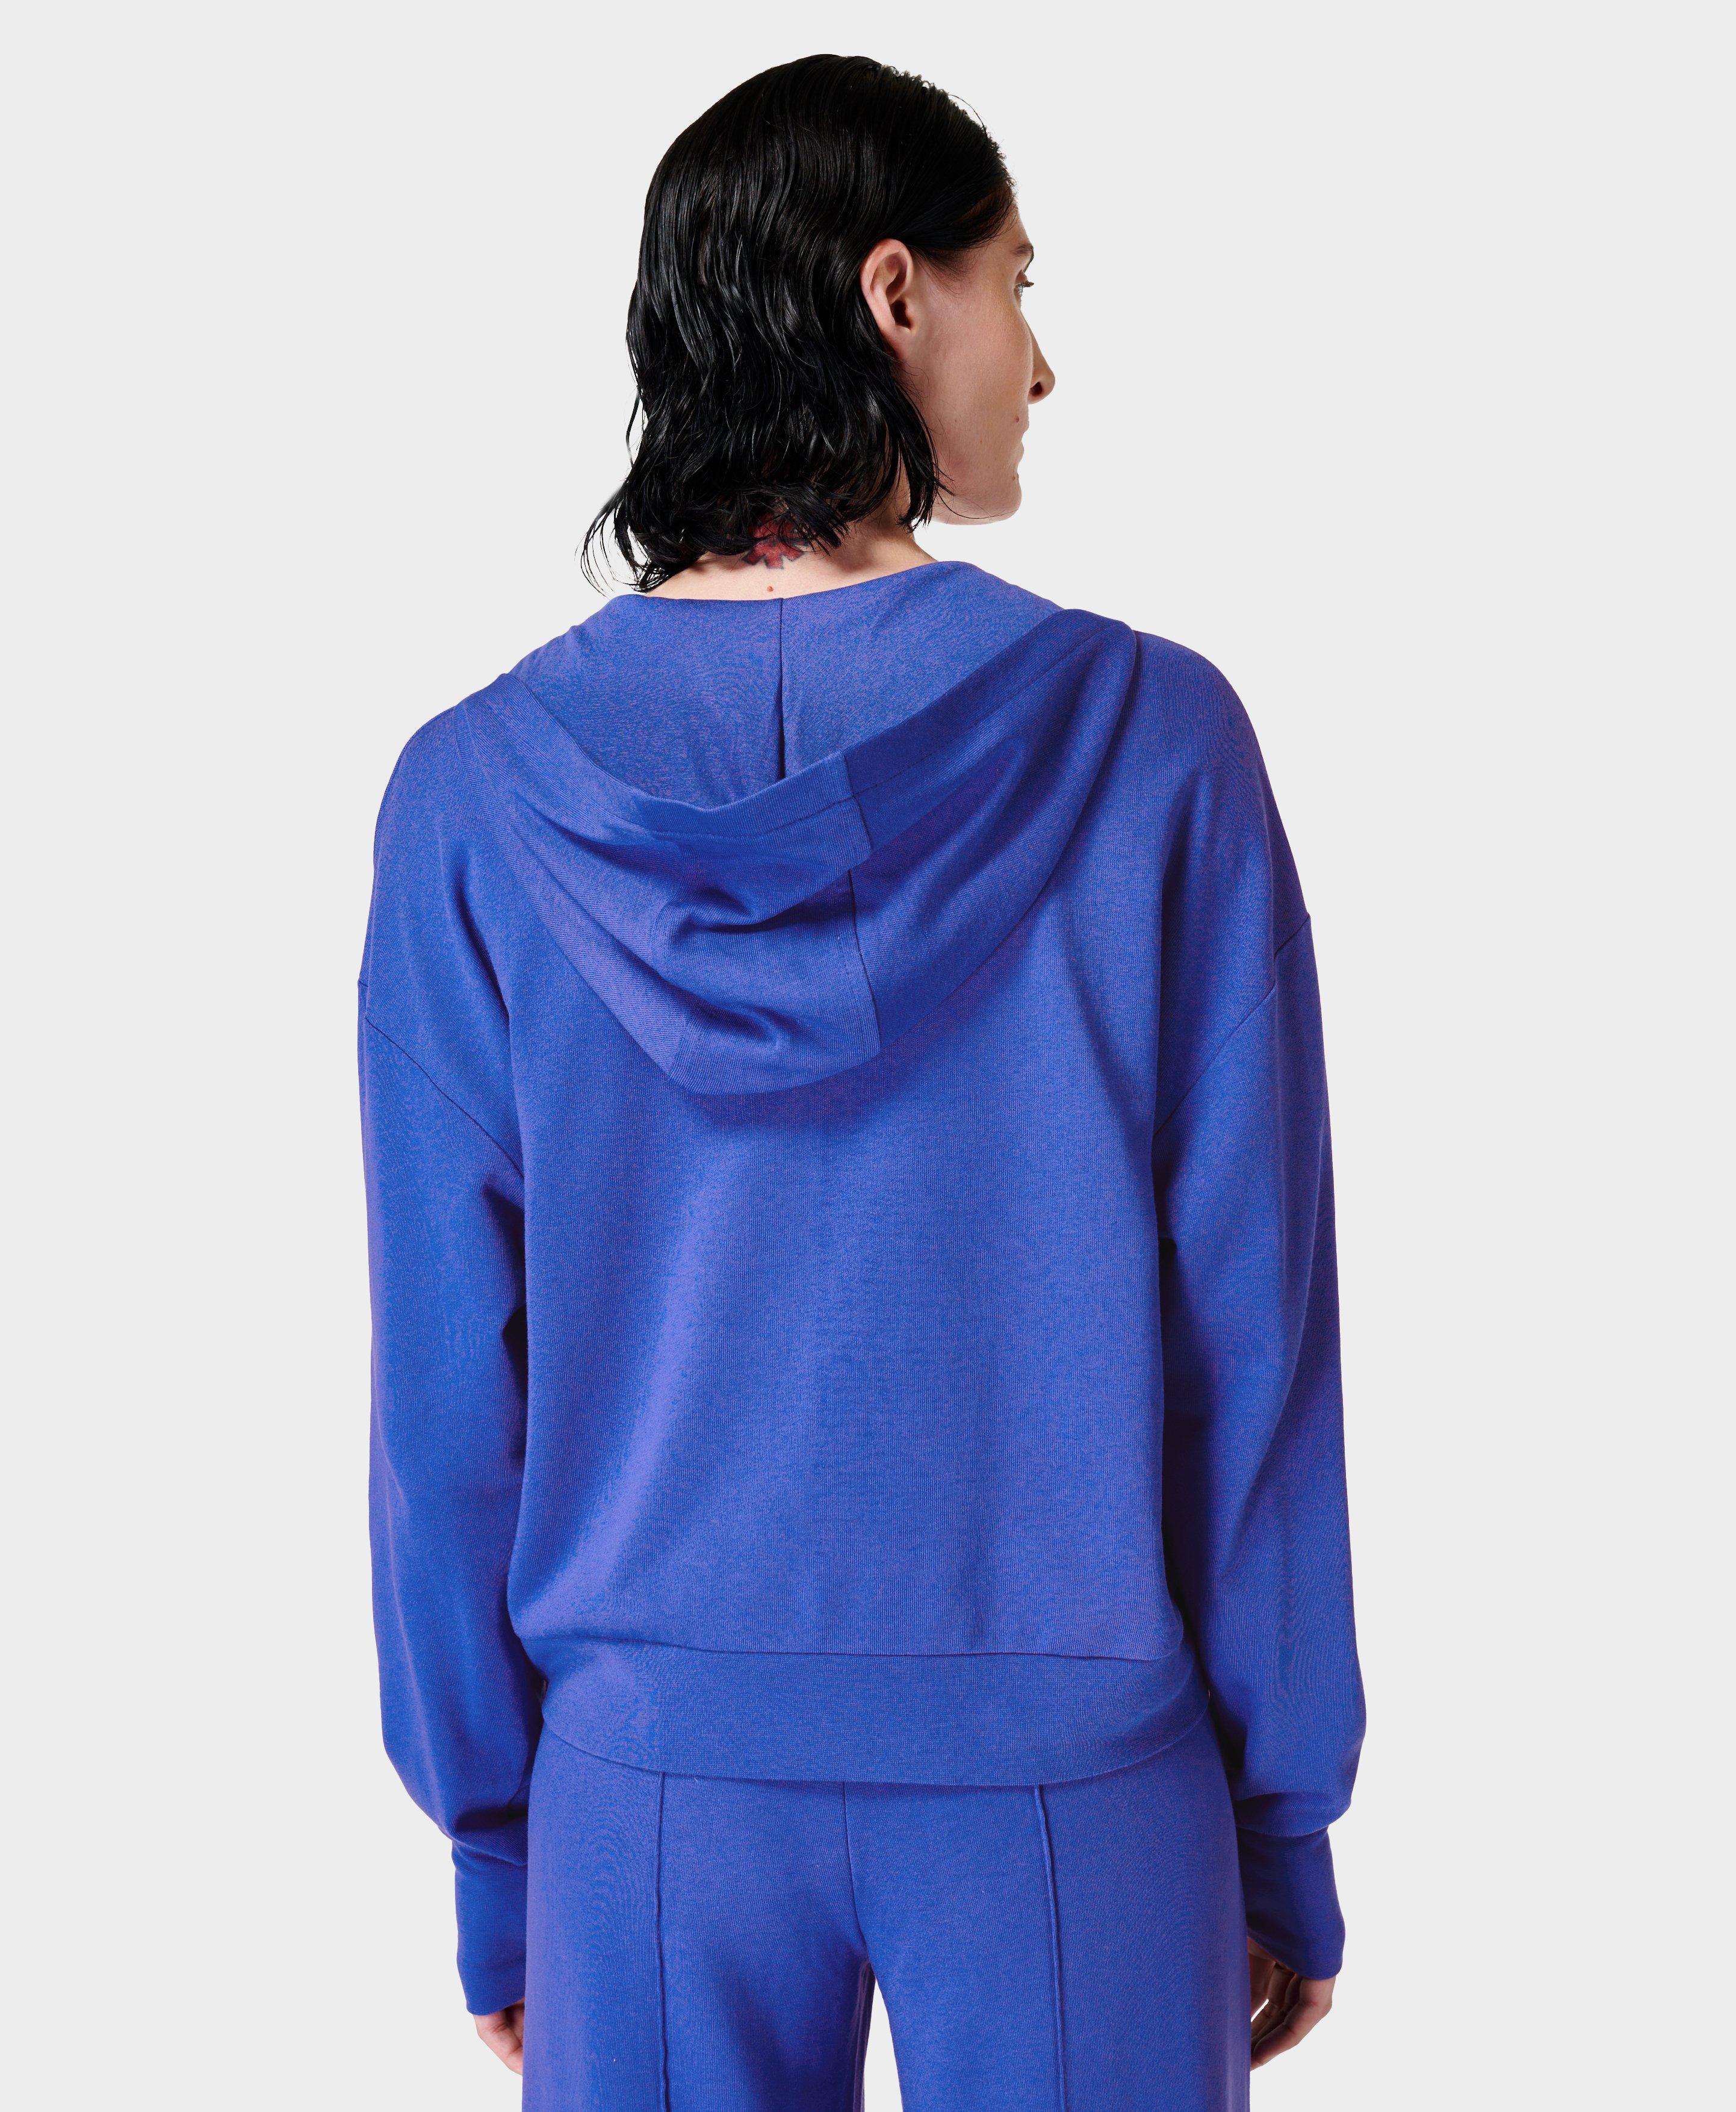 After Class Relaxed Hoodie- hourblue